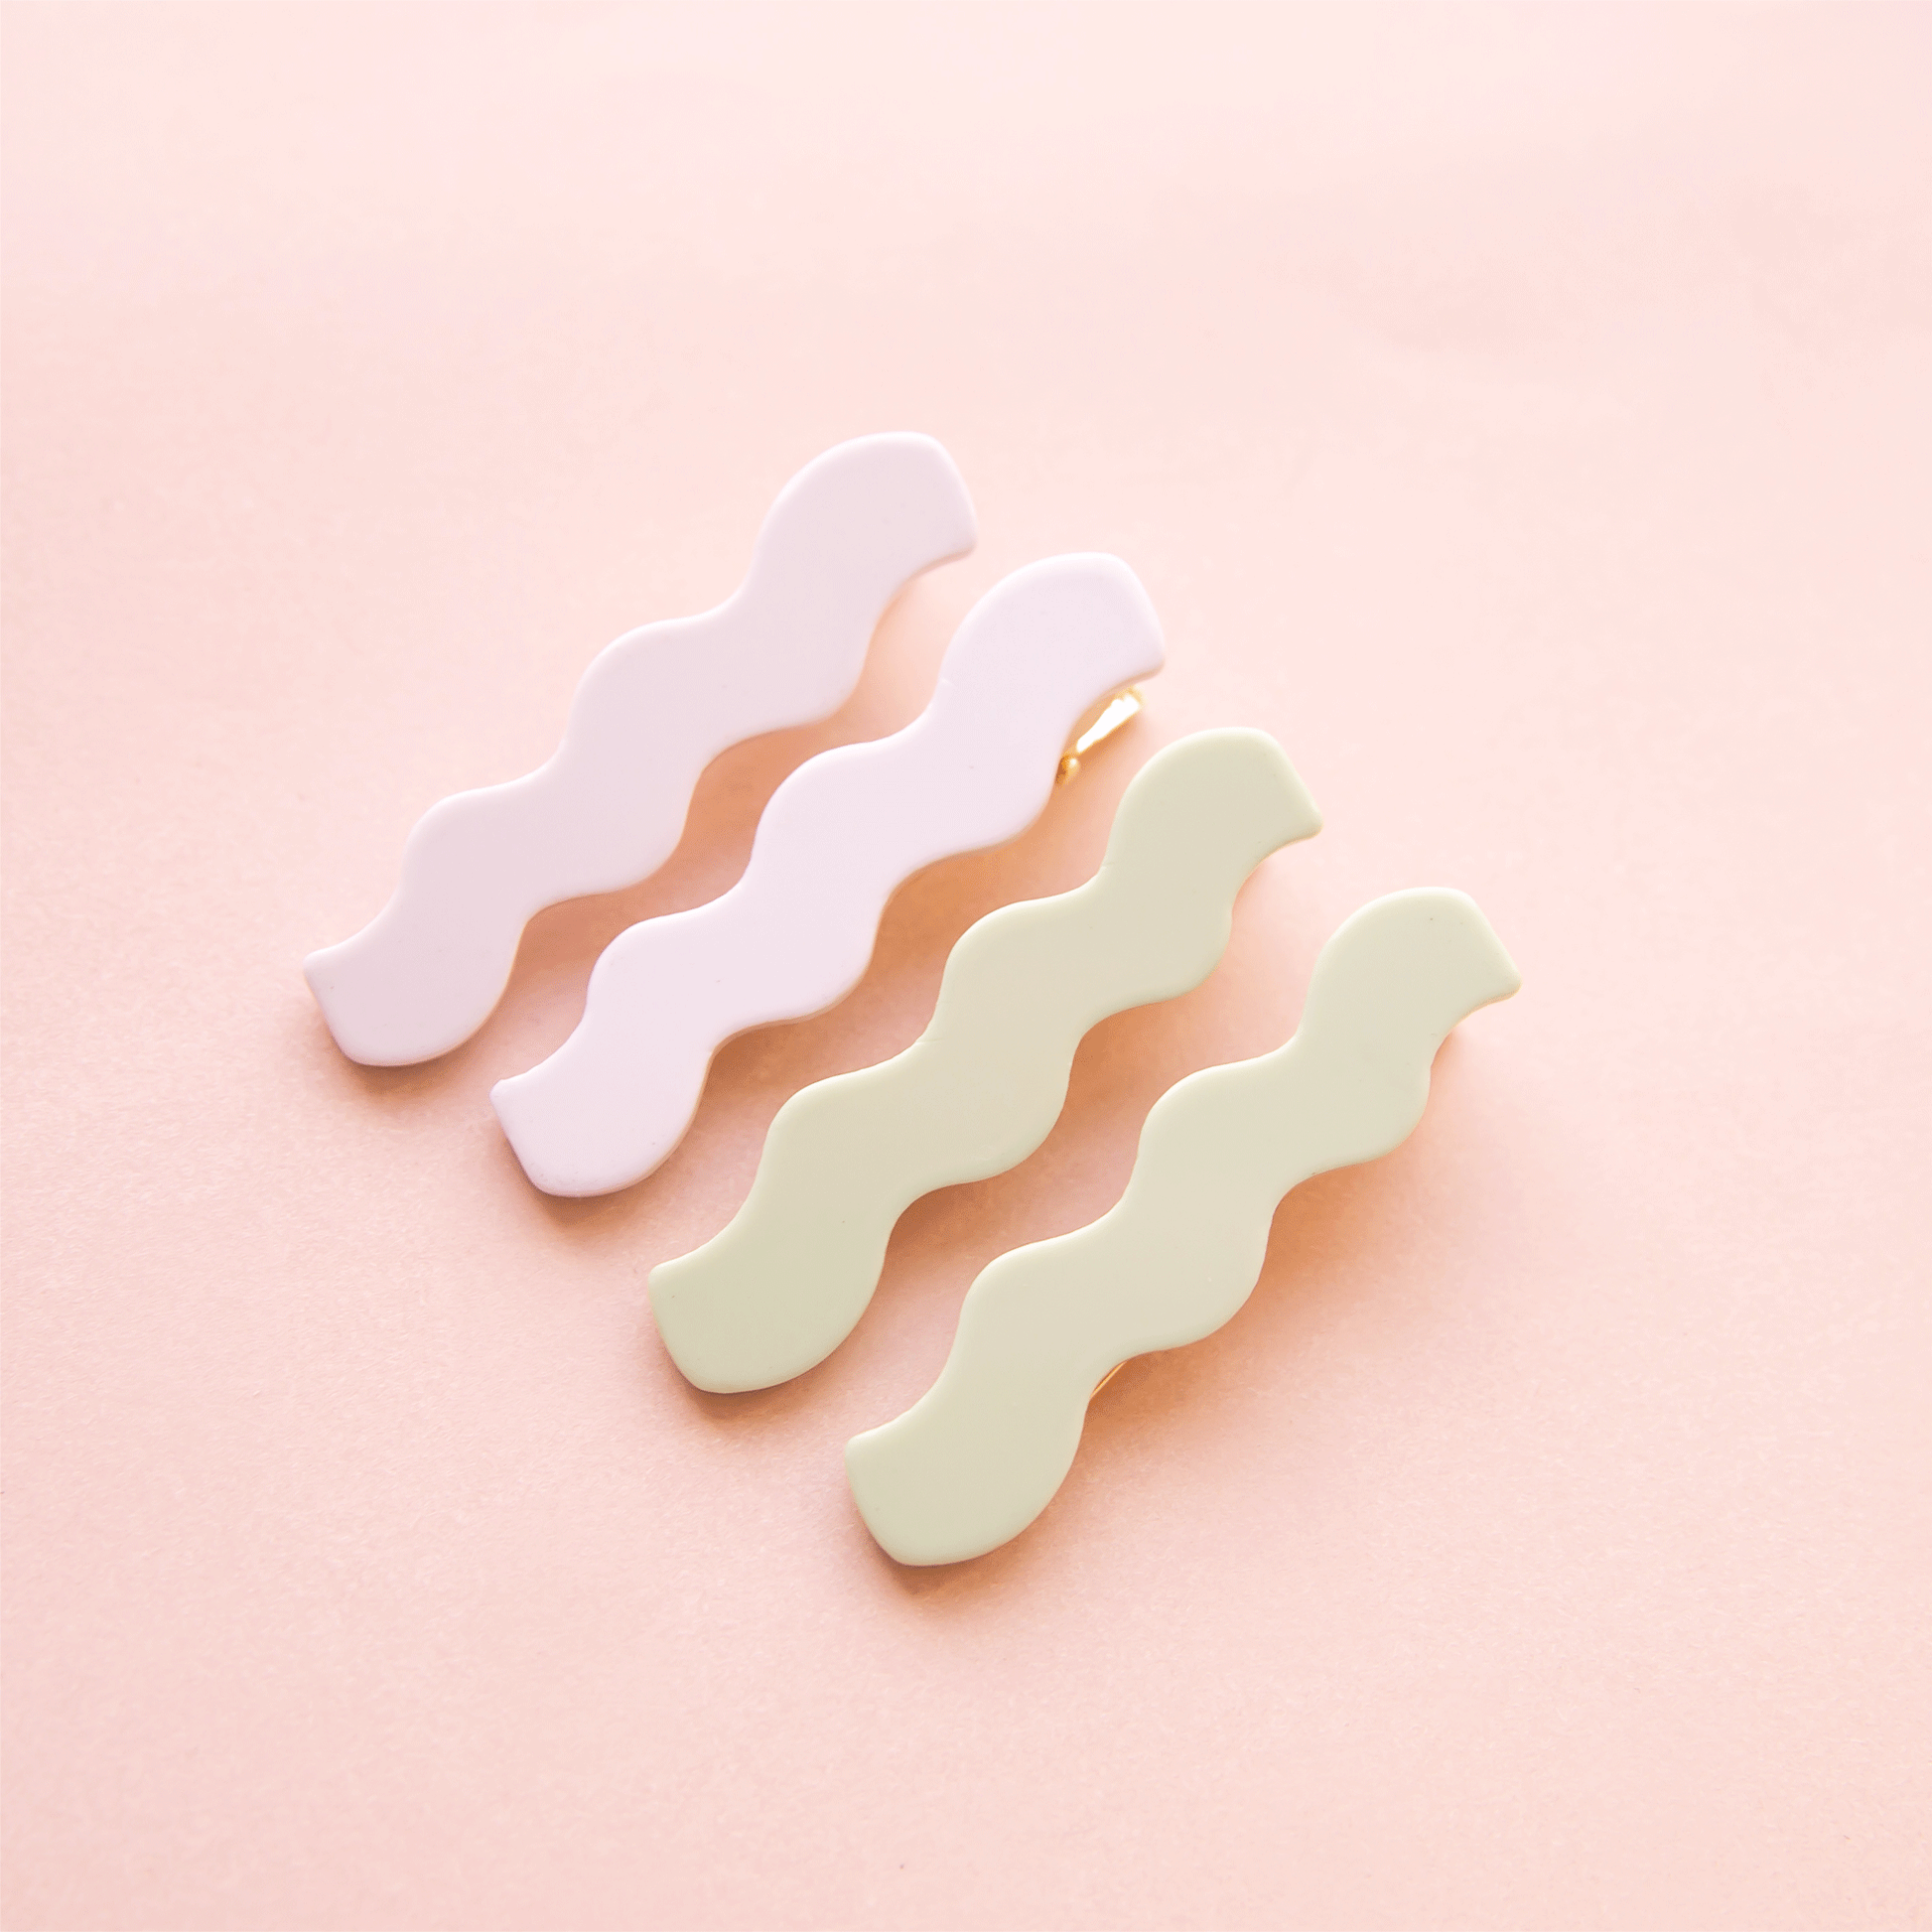 On a pink background is two sets of wavy shaped hair clips in a light green/blue shade and shade of white.